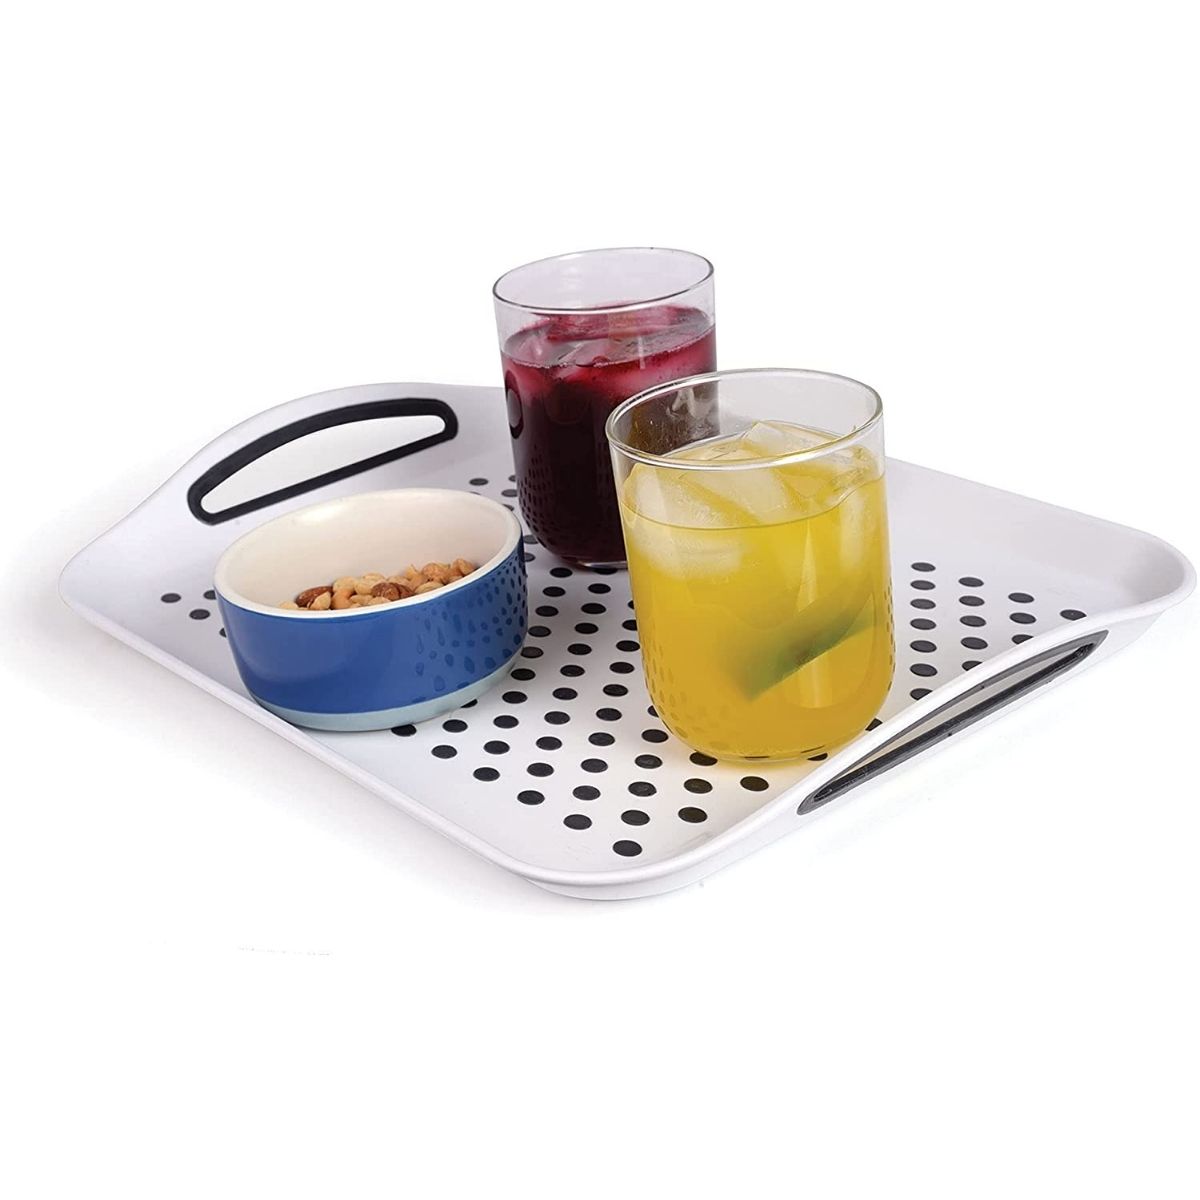 Valentine’s Day Breakfast In Bed? Get The Best Non-Slip Lap Tray With Handles!